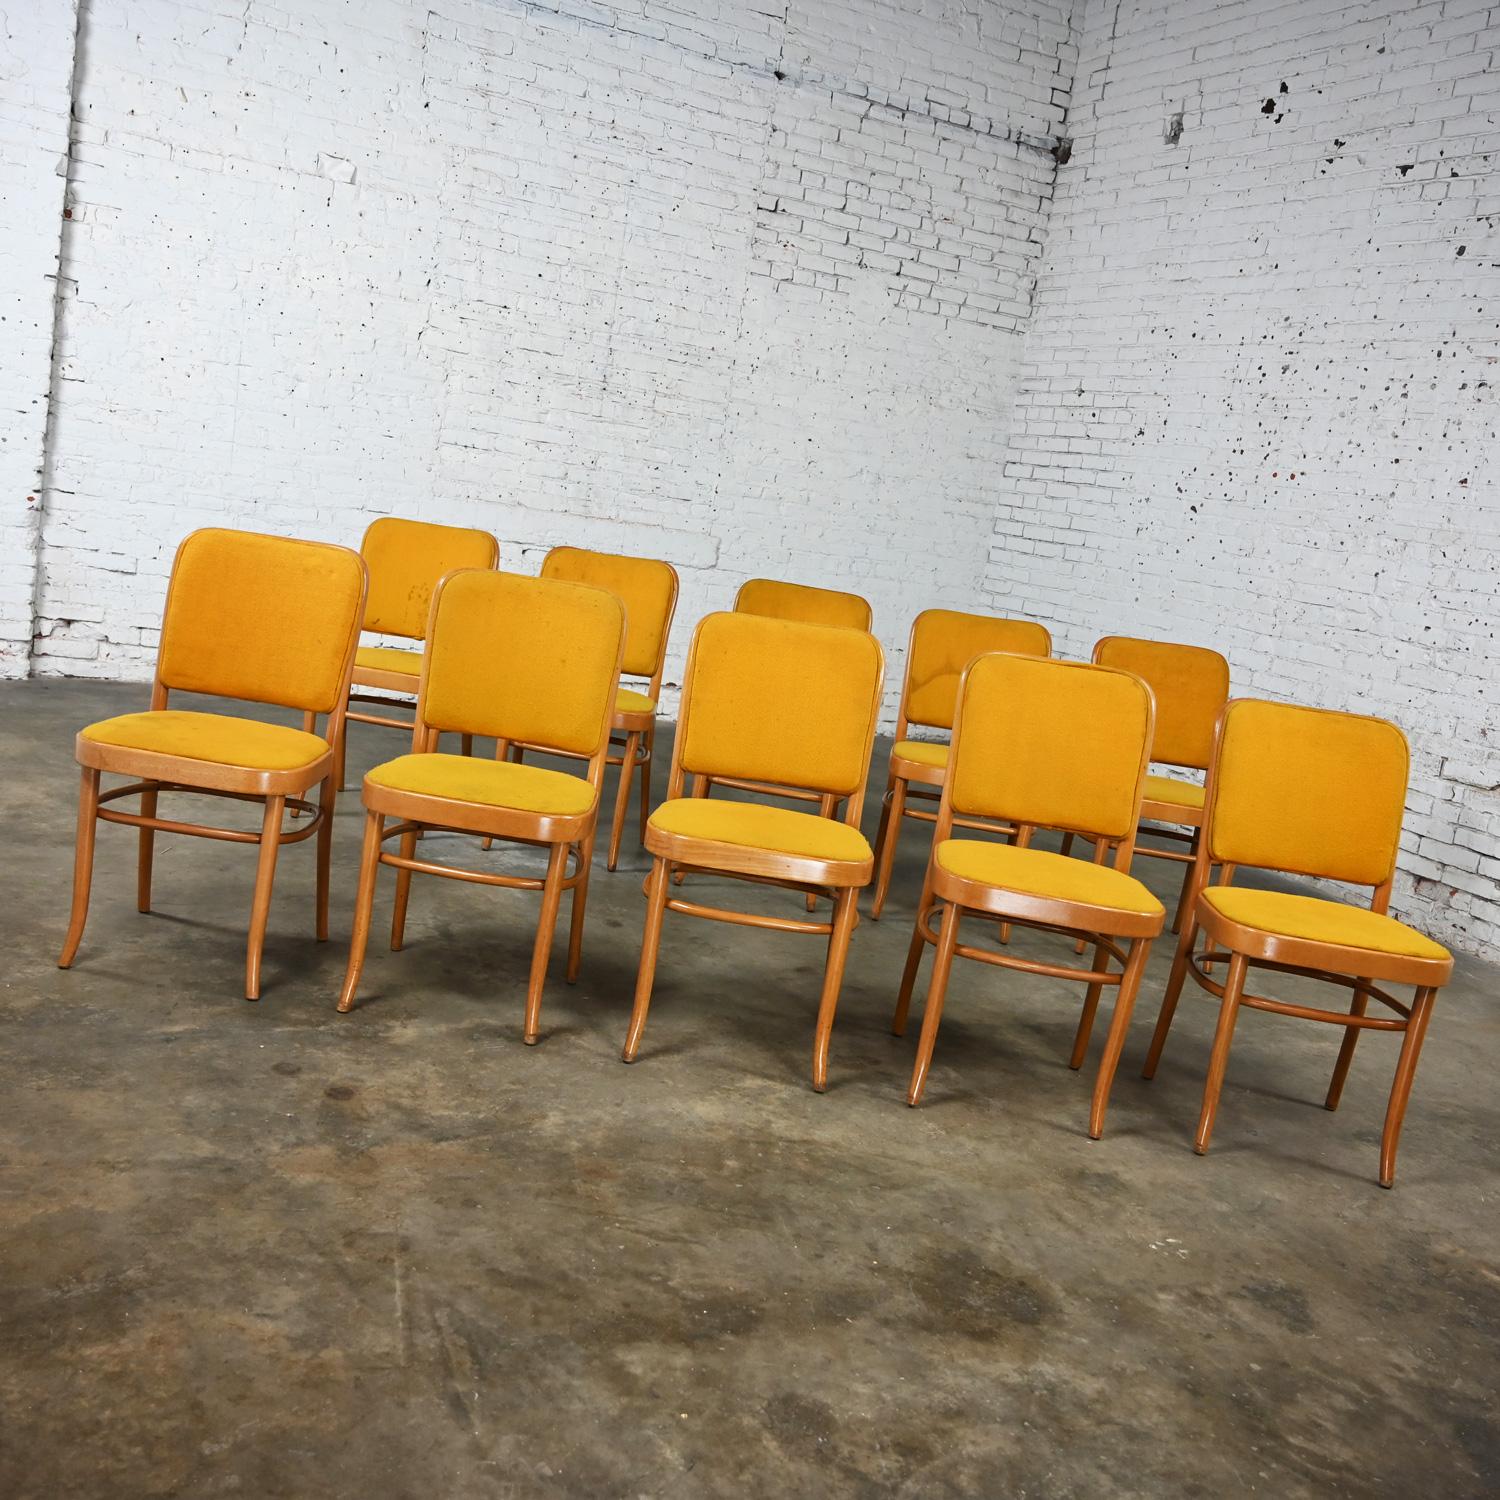 Wonderful vintage Bauhaus beech bentwood frame Thonet Josef Hoffman Prague 811 style armless side dining chairs by Falcon Products Inc., set of 10. Beautiful condition, keeping in mind that these are vintage and not new so will have signs of use and